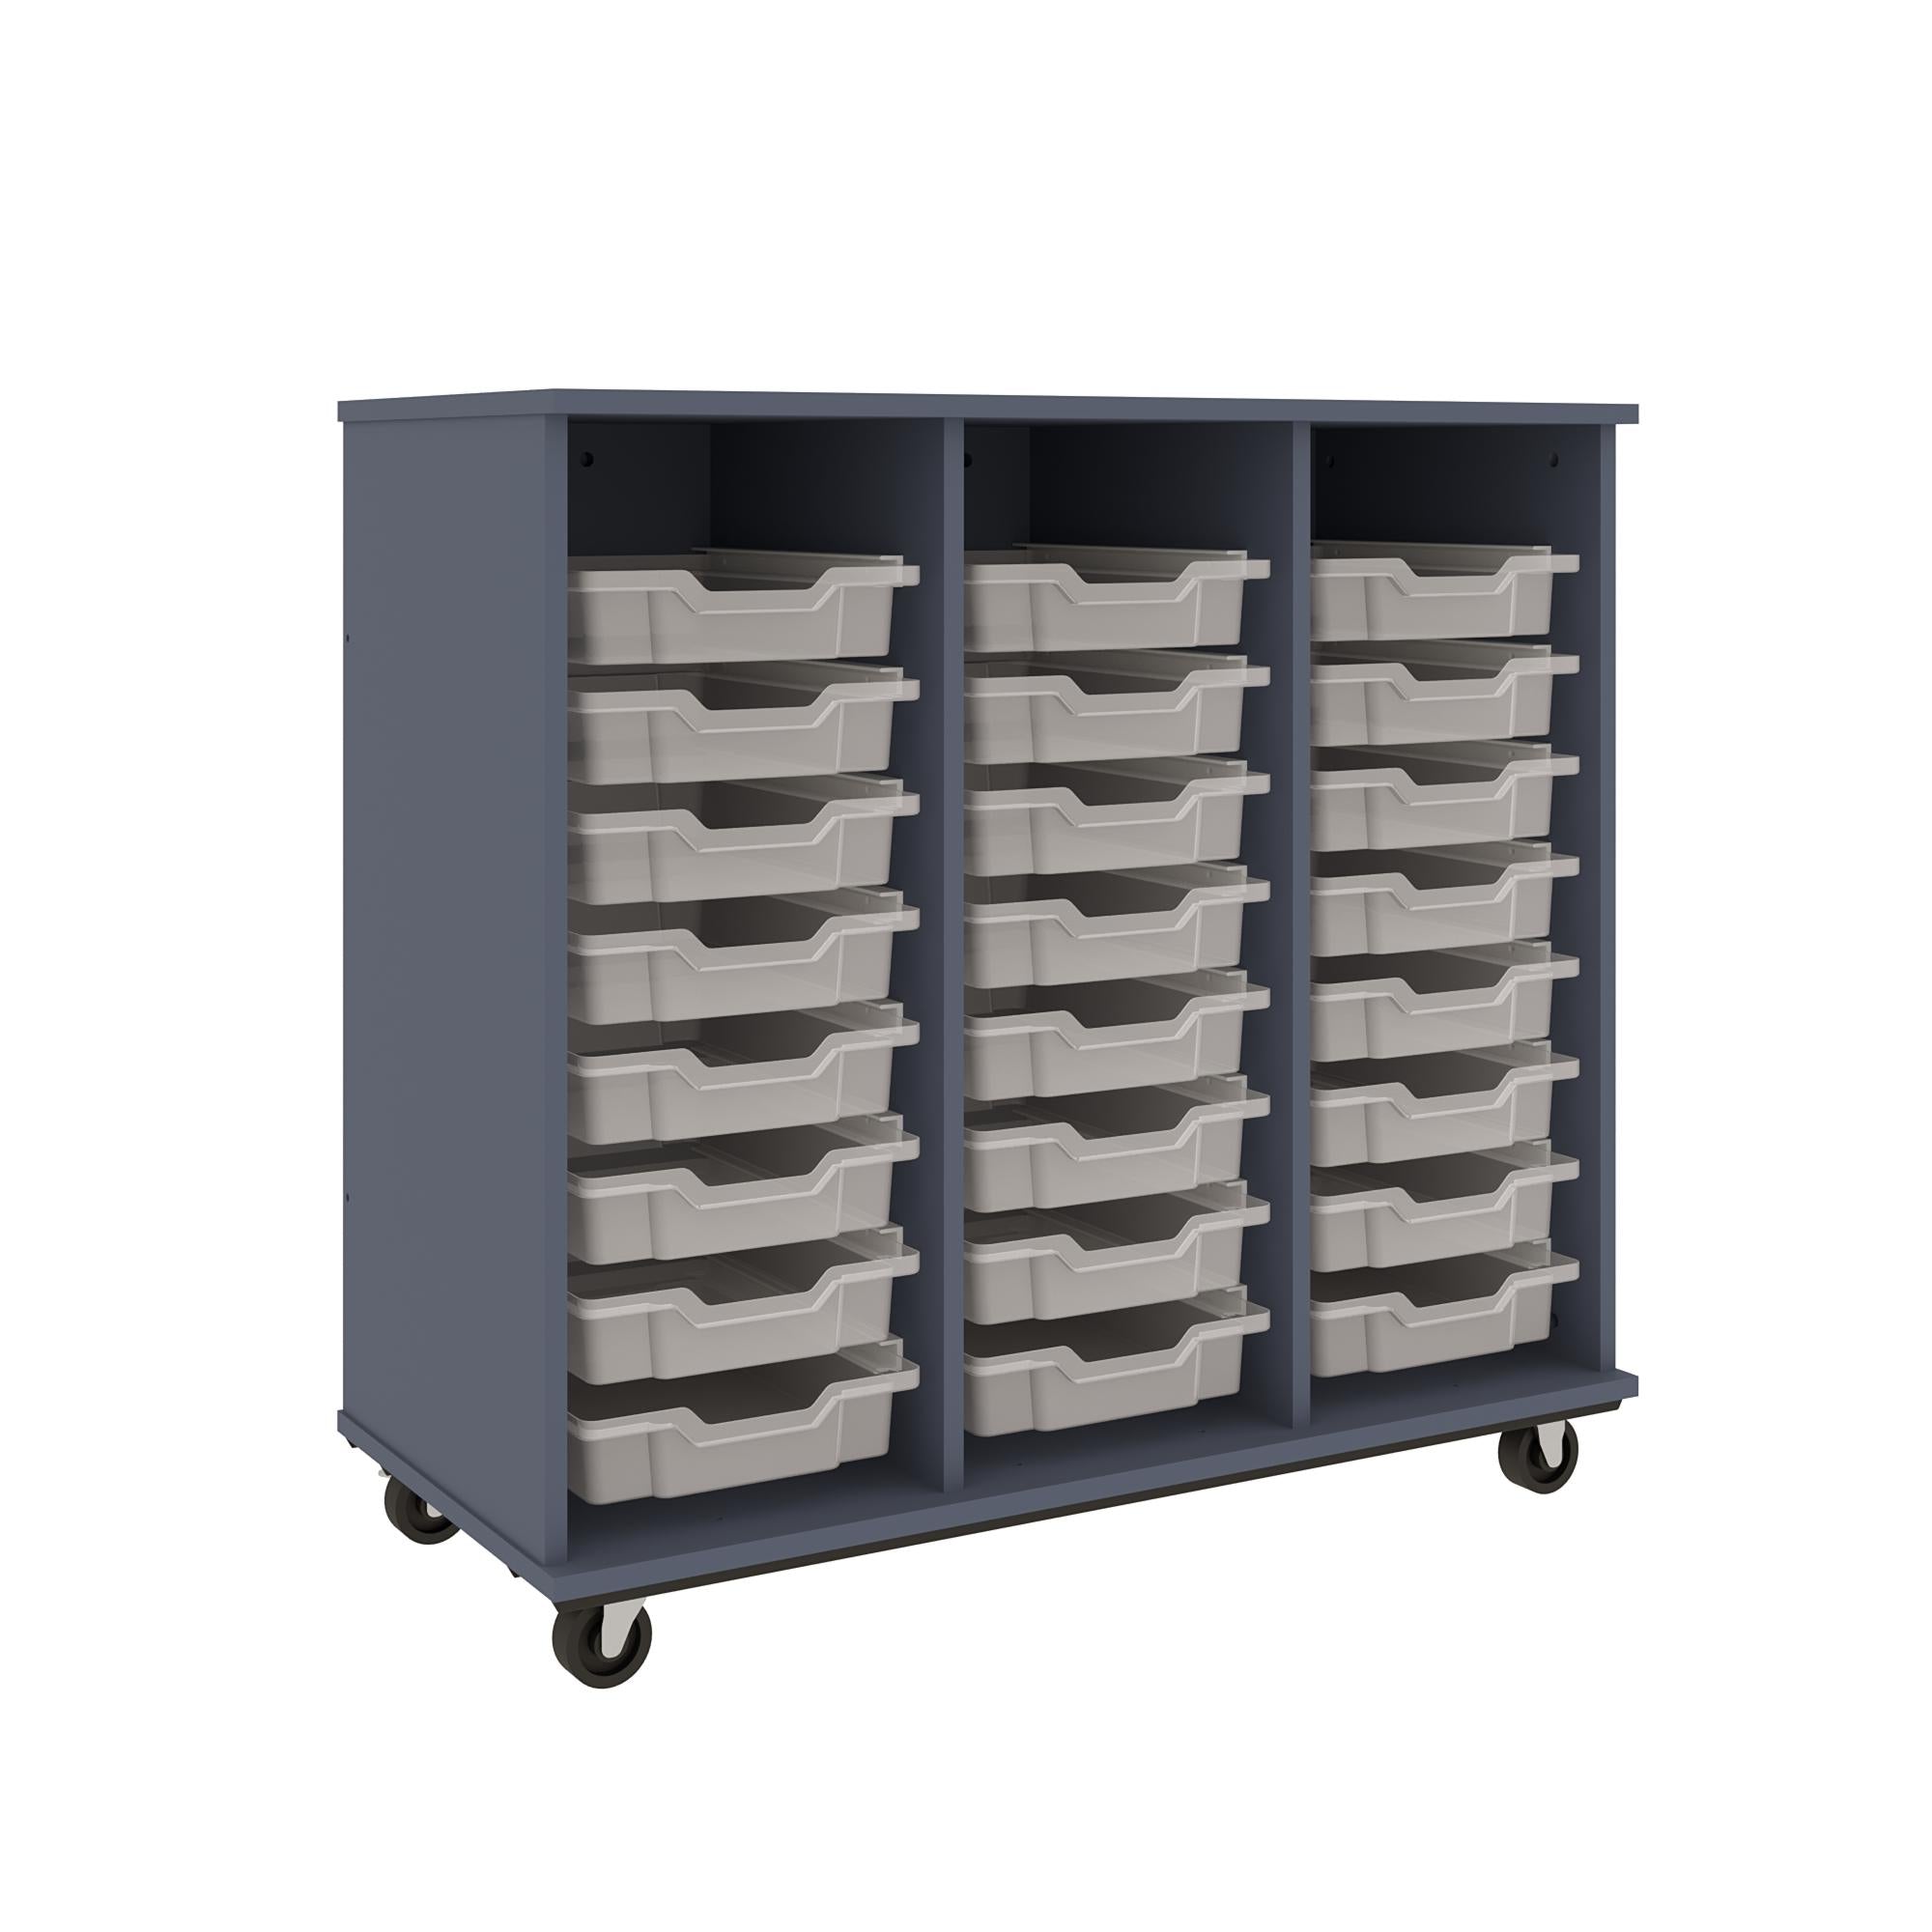 36" Tall Assembled Counter-Height Mobile Shelf Storage Cabinet with Lockable Doors - 80181 F36